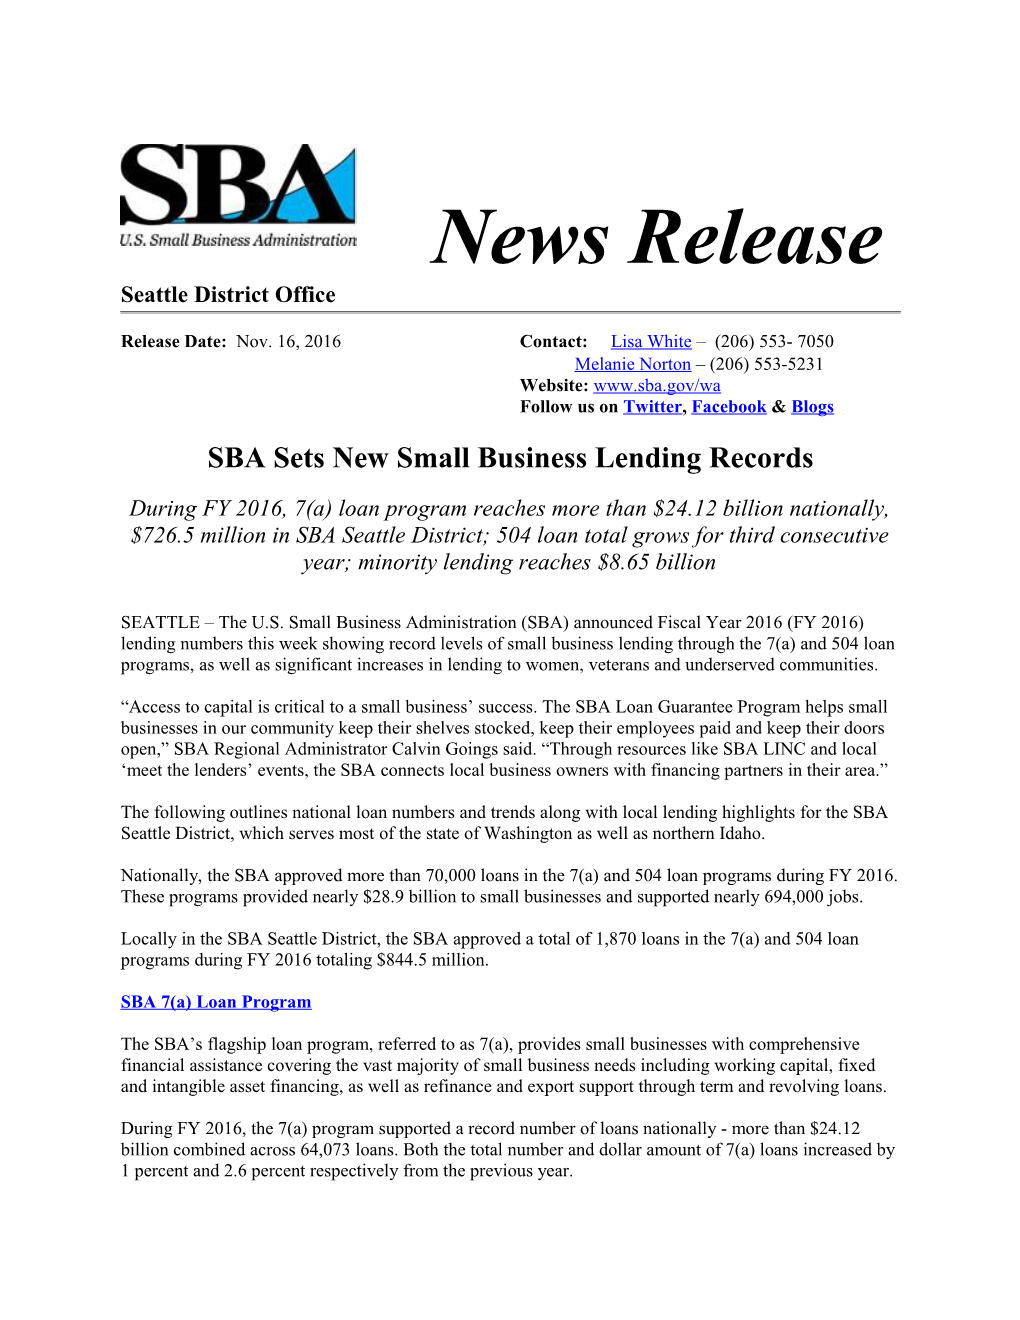 SBA Sets New Small Business Lending Records